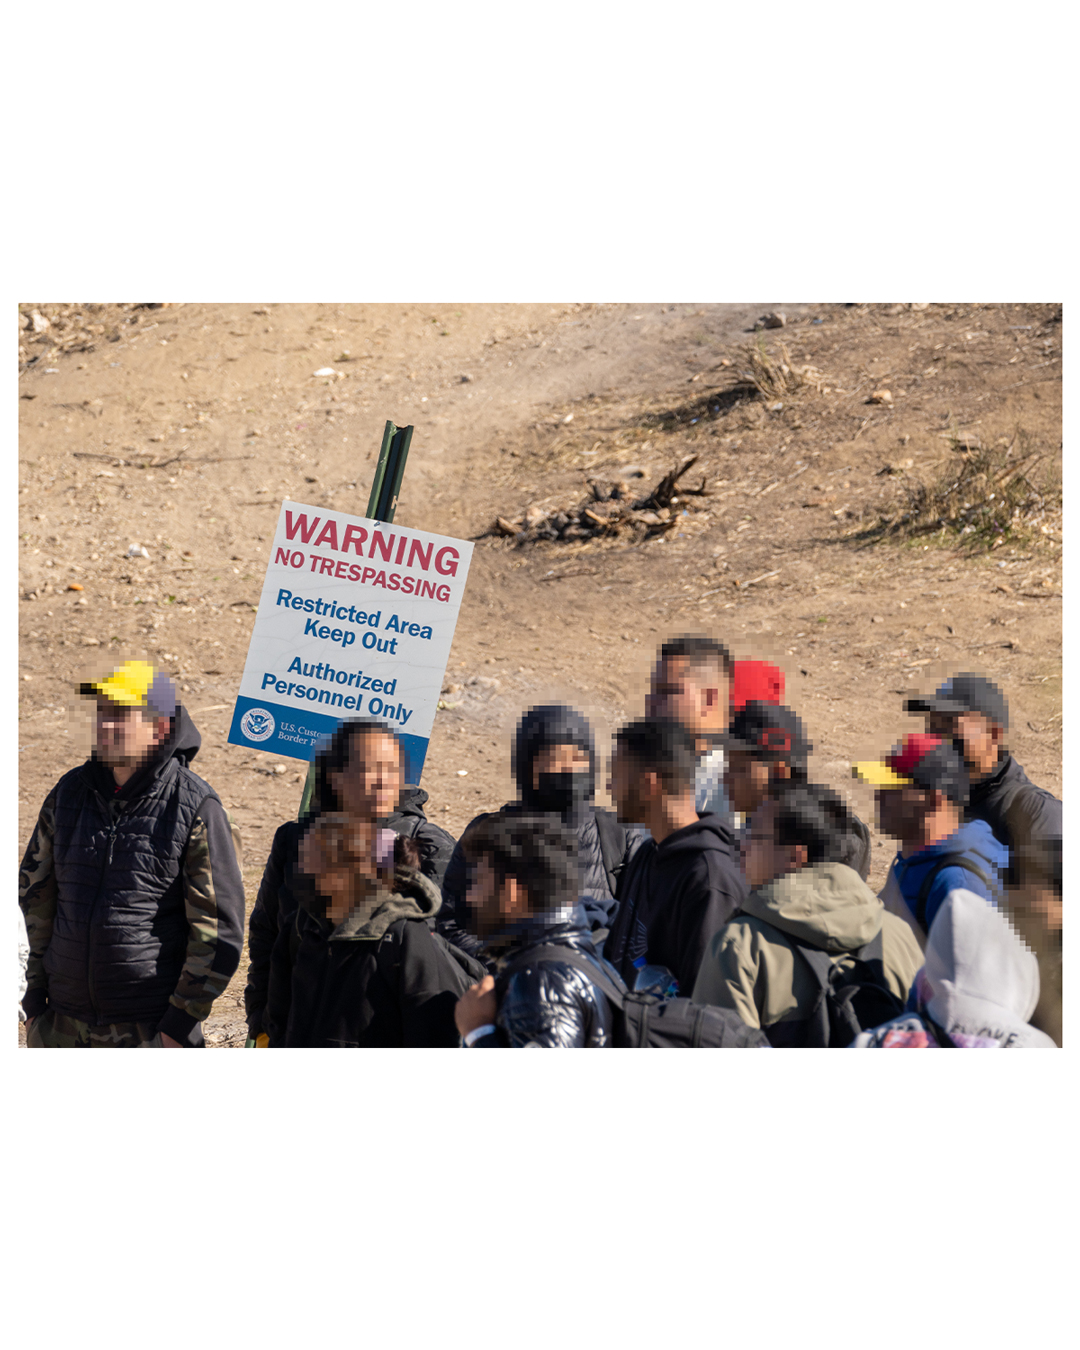 Against an empty desert background is a sign that reads
WARNING: NO TRESSPASSING
Restricted Area
Keep Out
Authorized Personnel Only
In front of the sign is a group of migrant men and women, waiting in the desert sun.